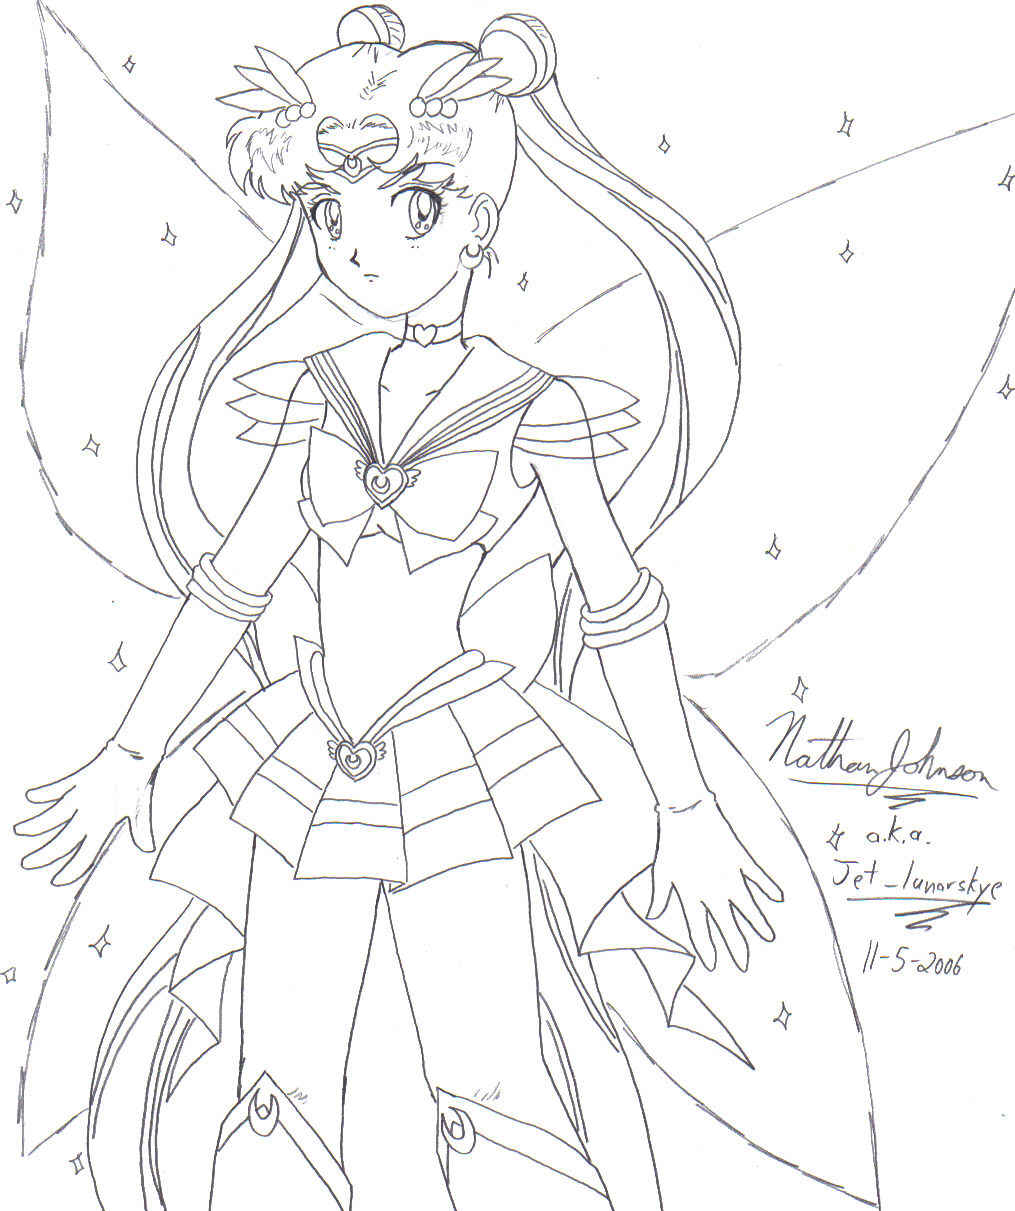 Super Sailor Moon with wings by Jet_lunarskye